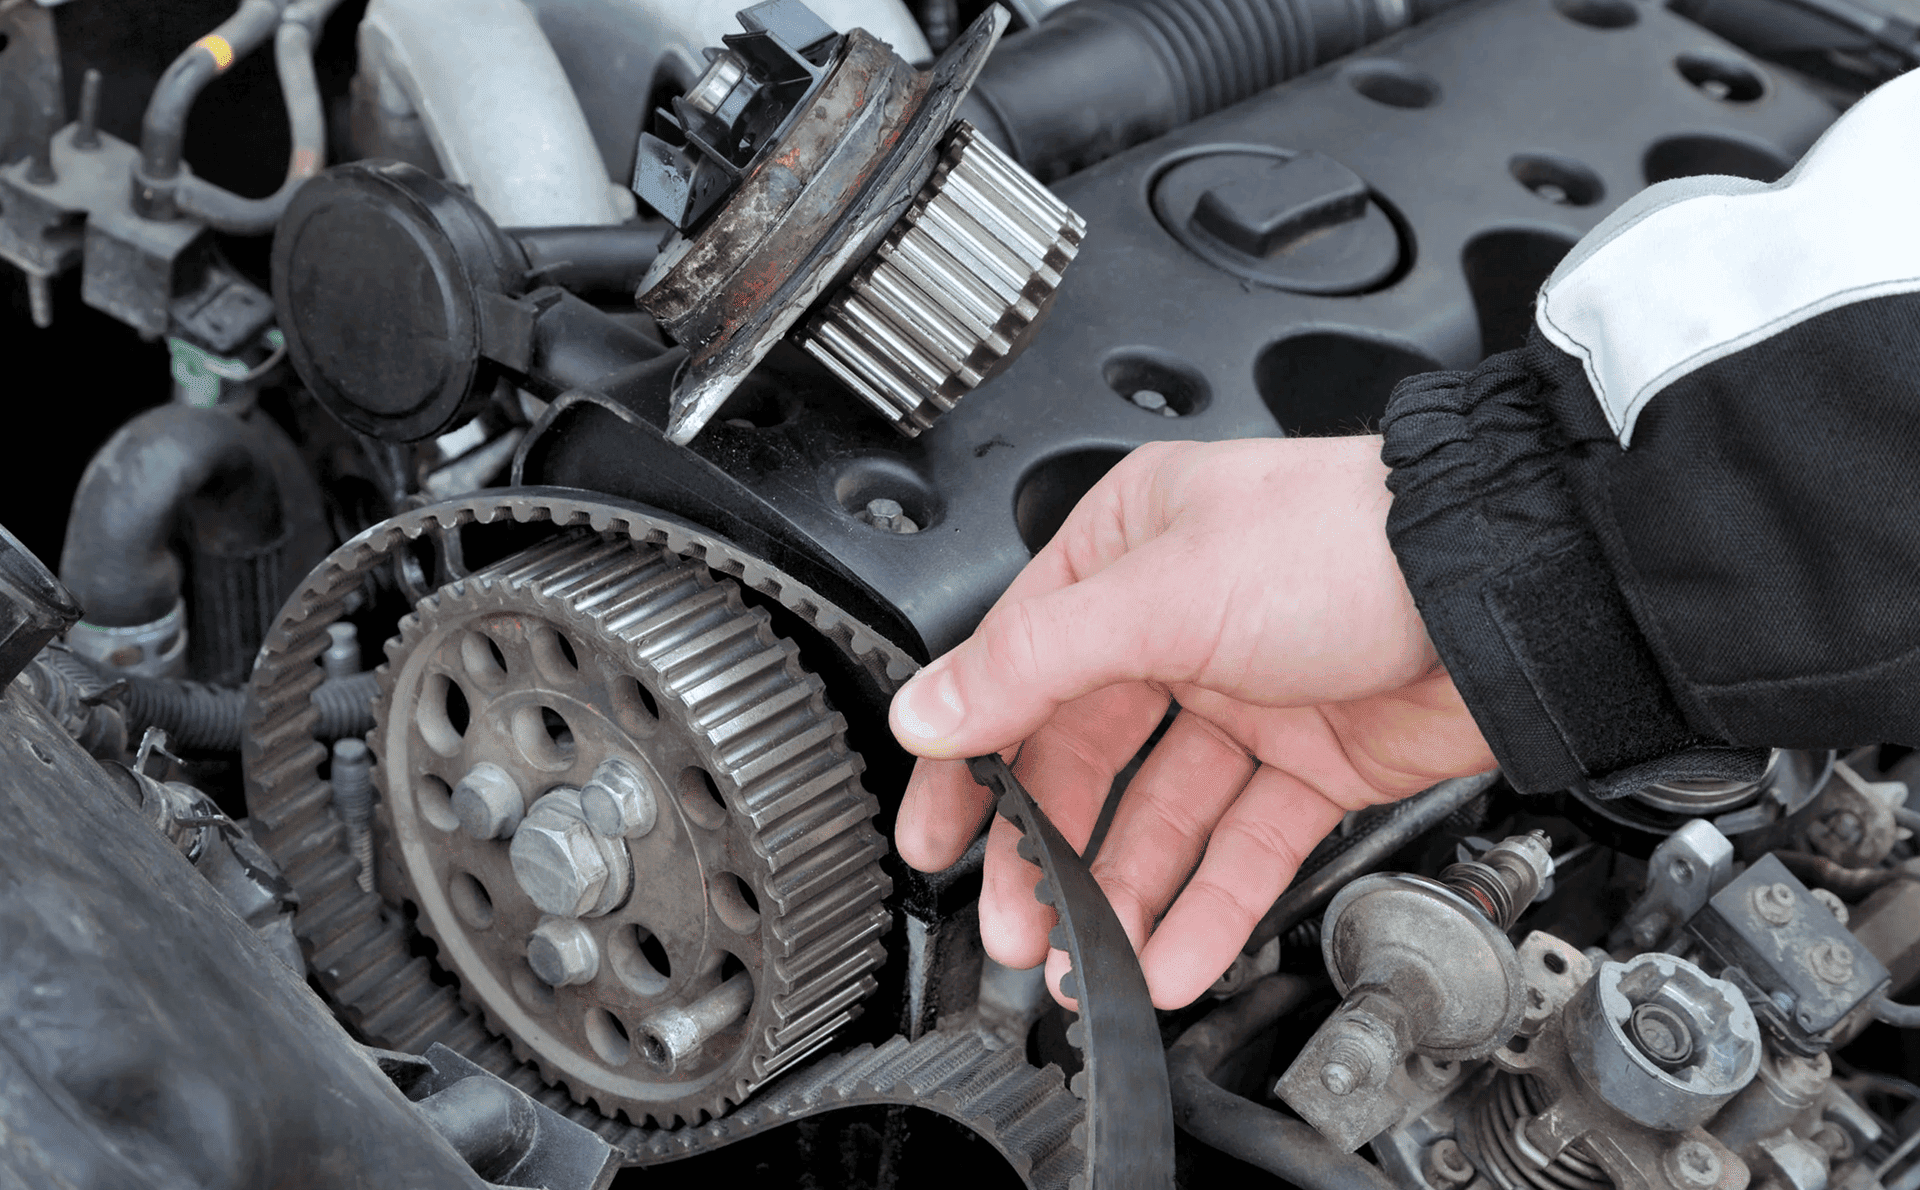 The Inside Scoop: Crucial Insights Your Mechanic Wants You to Know About Water Pump Maintenance